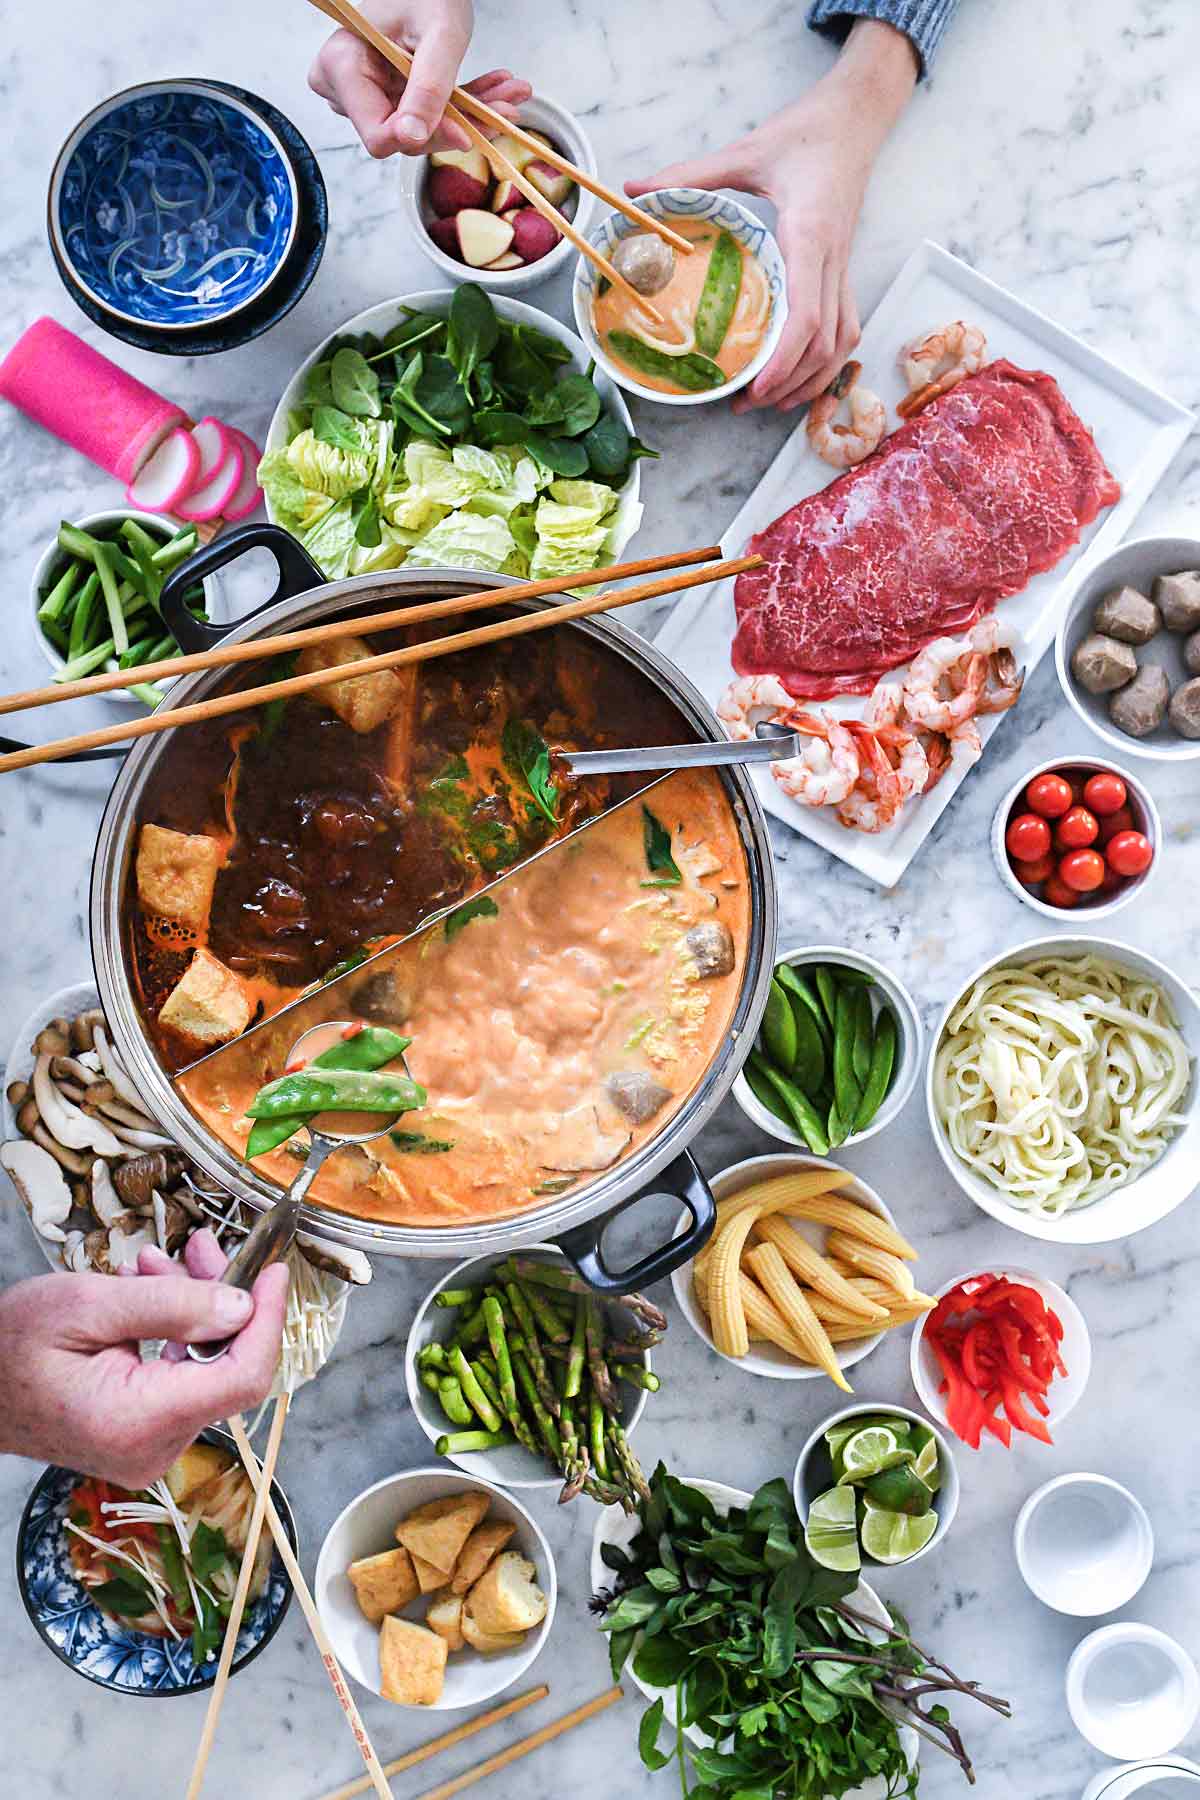 How to Cook Hot Pot at Home, Cooking School